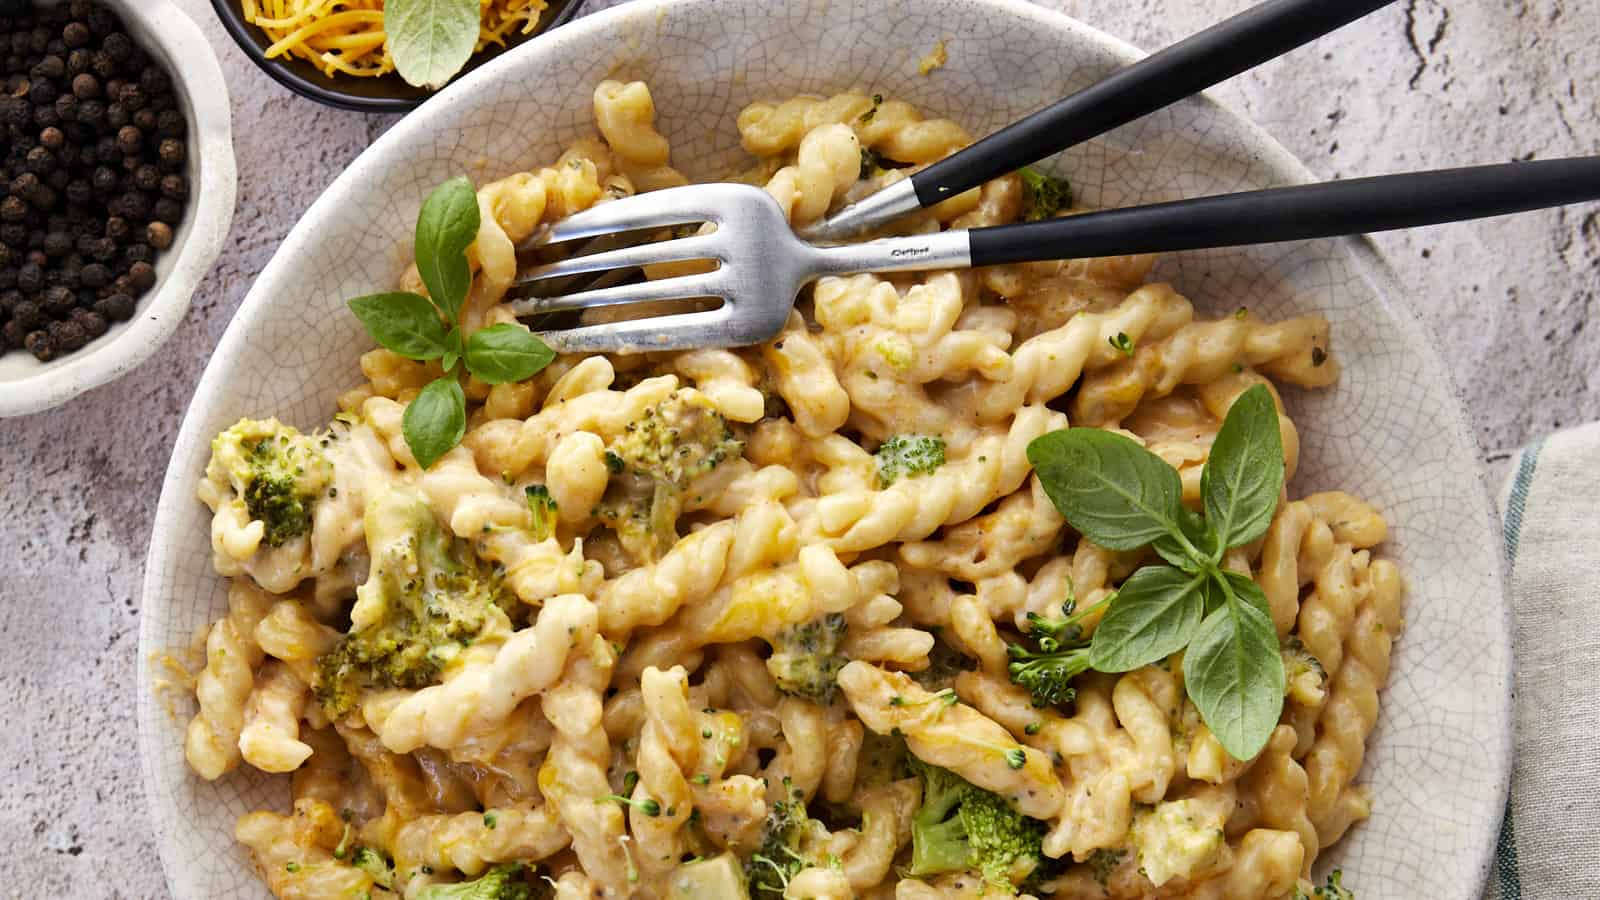 Overhead image of a bowl of baked broccoli mac and cheese with two forks.